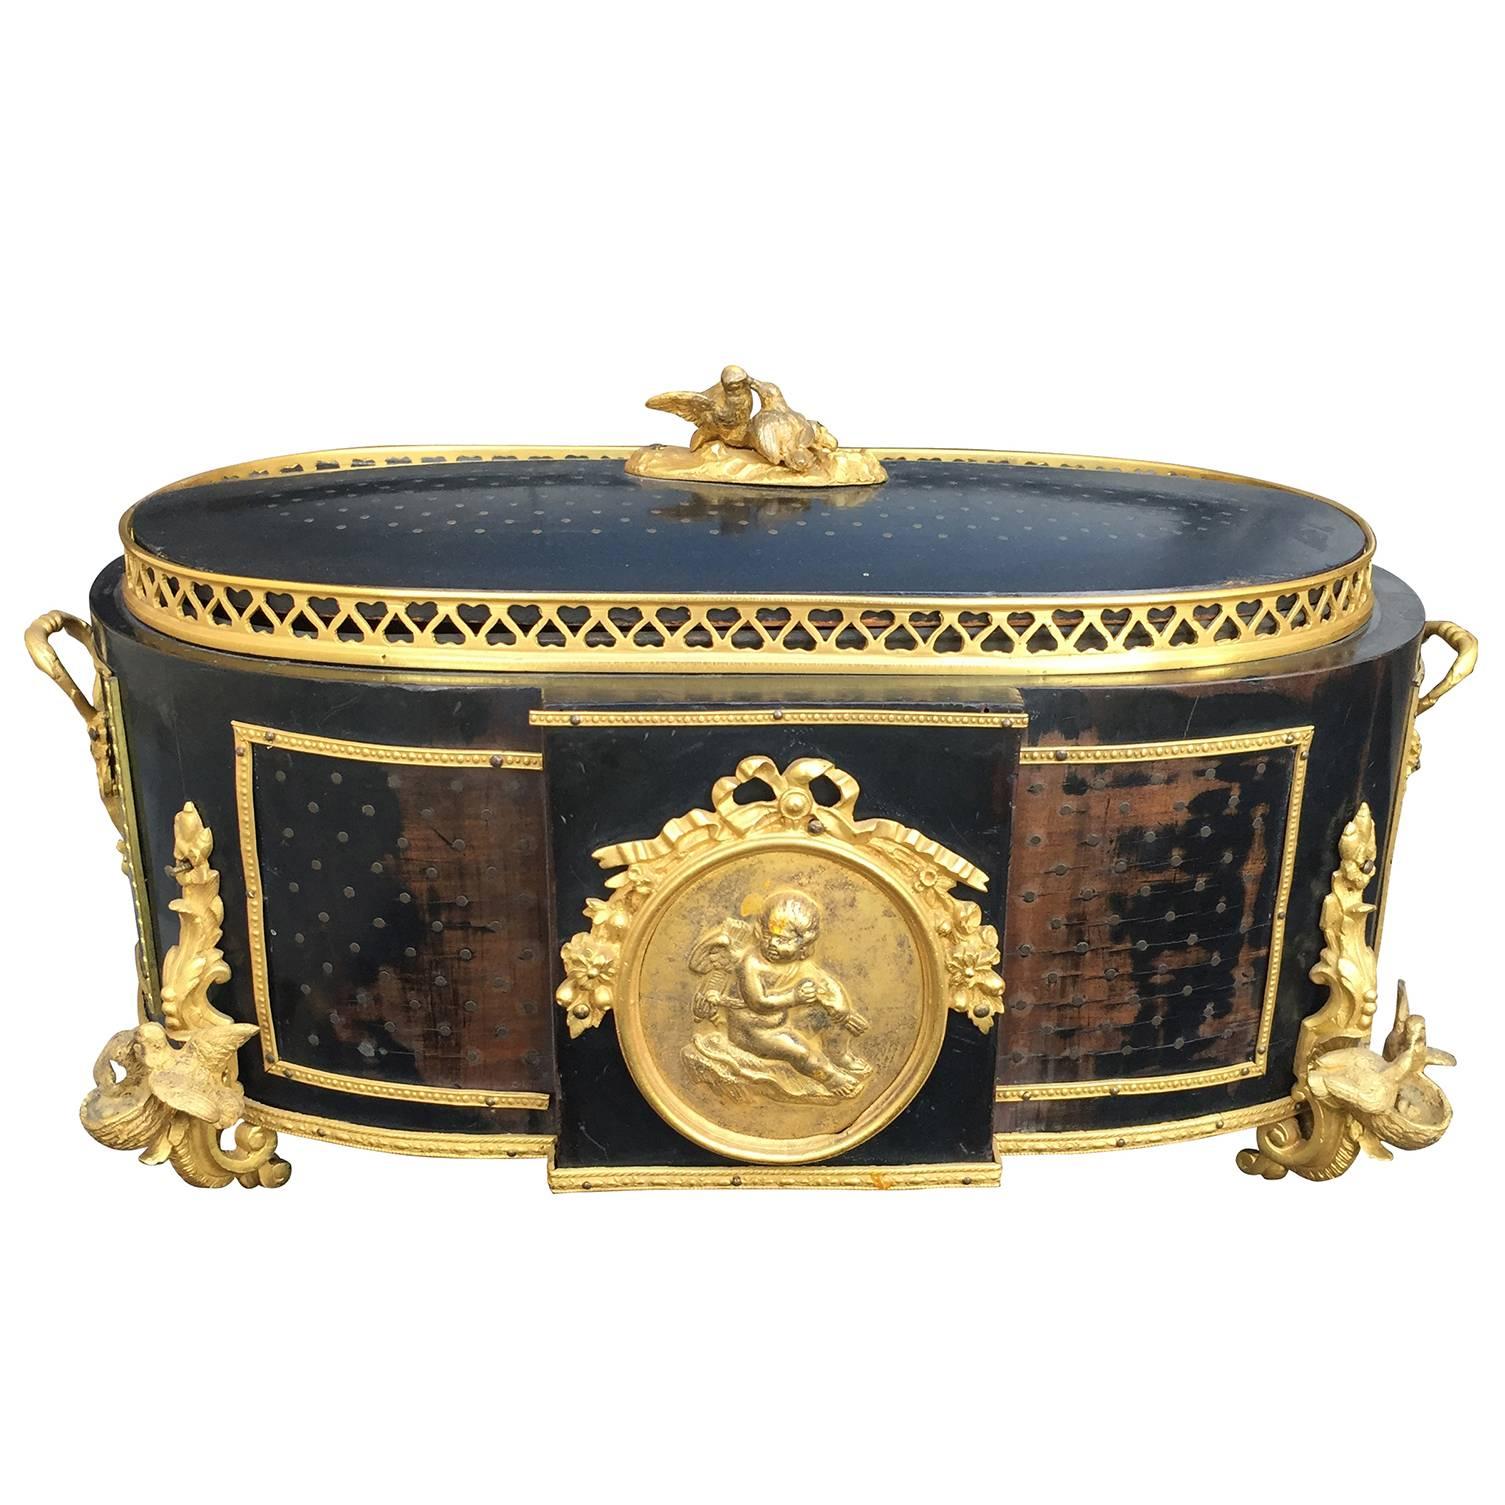 19th Century French Ebonized Gilt Bronze Box with Mother-of-Pearl Inlay